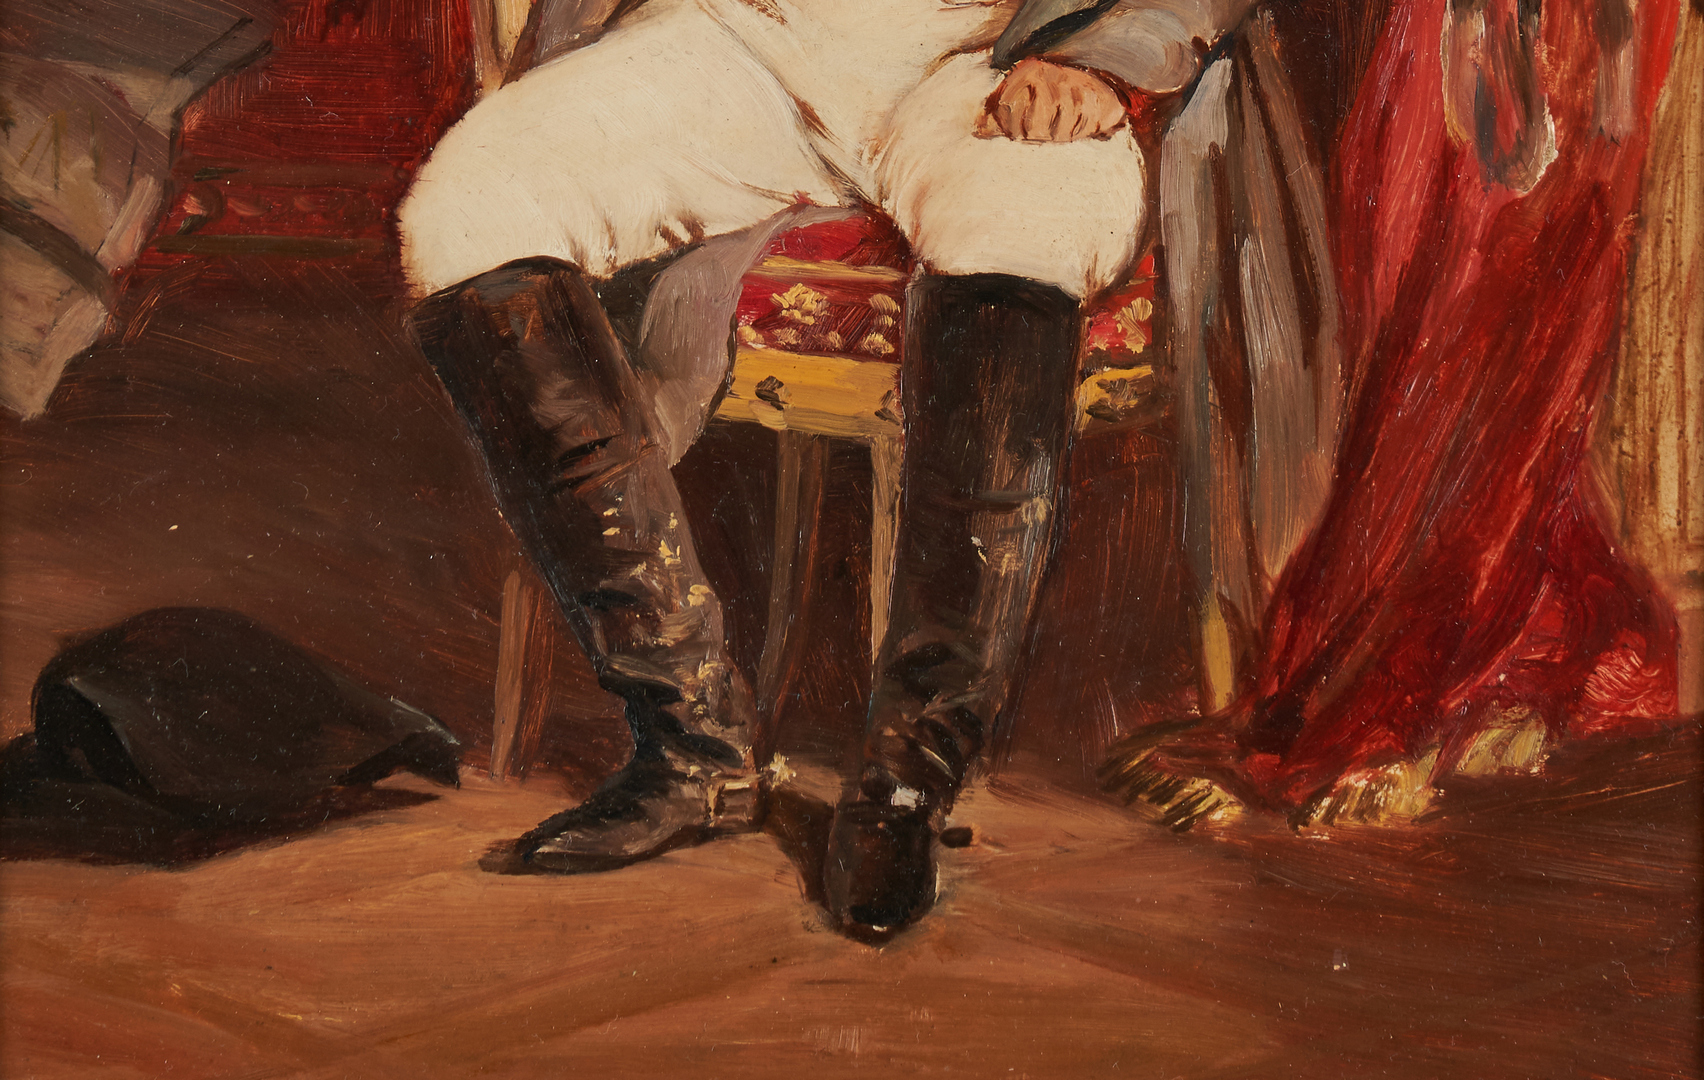 Lot 310: Painting and Print of Napoleon, after Delaroche